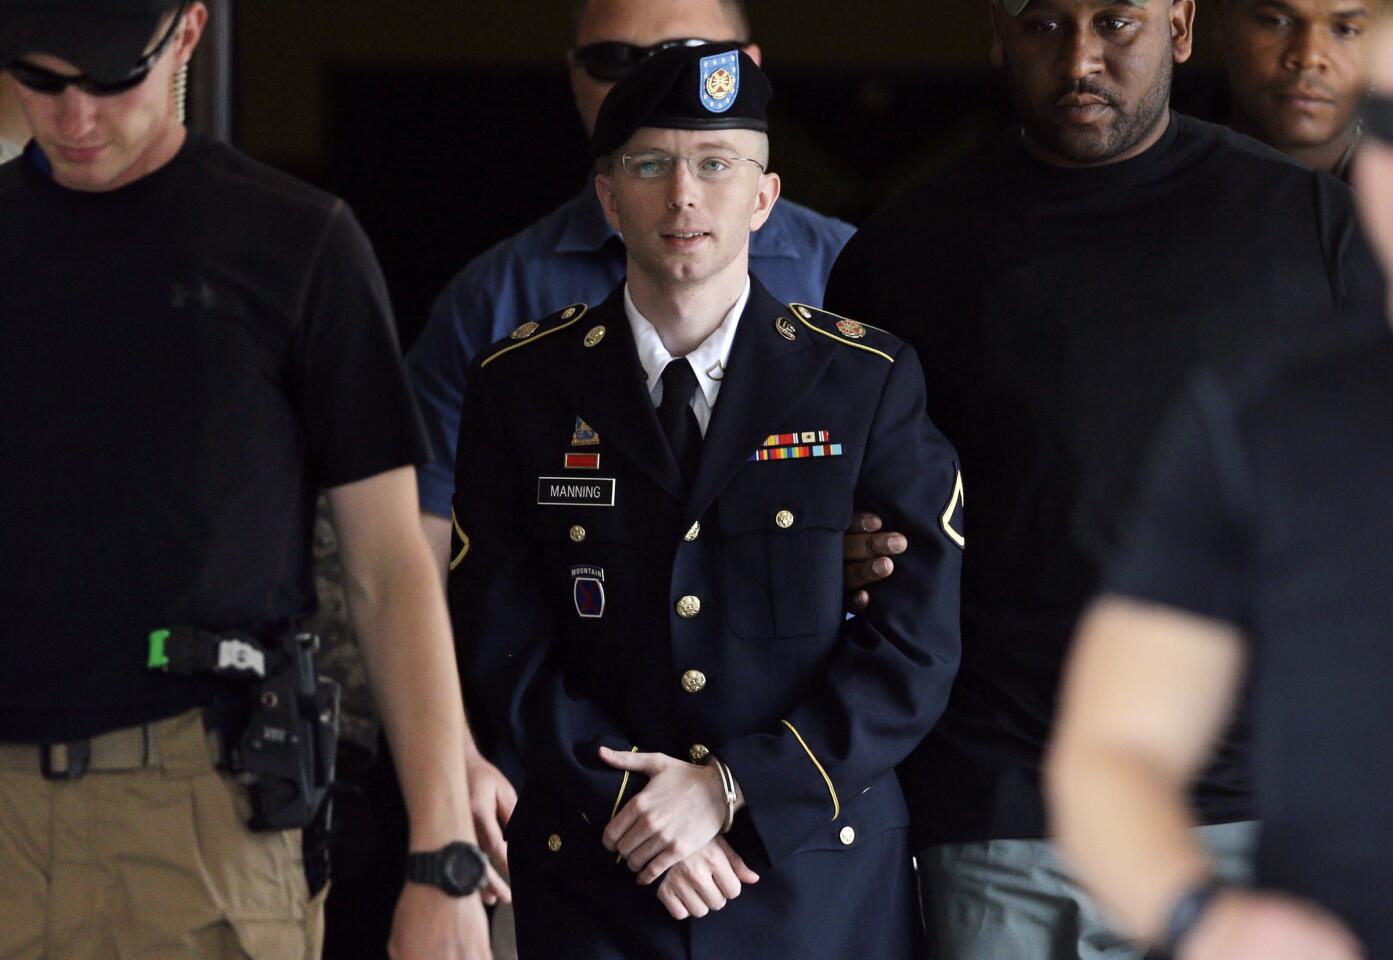 Army Pfc. Chelsea Manning